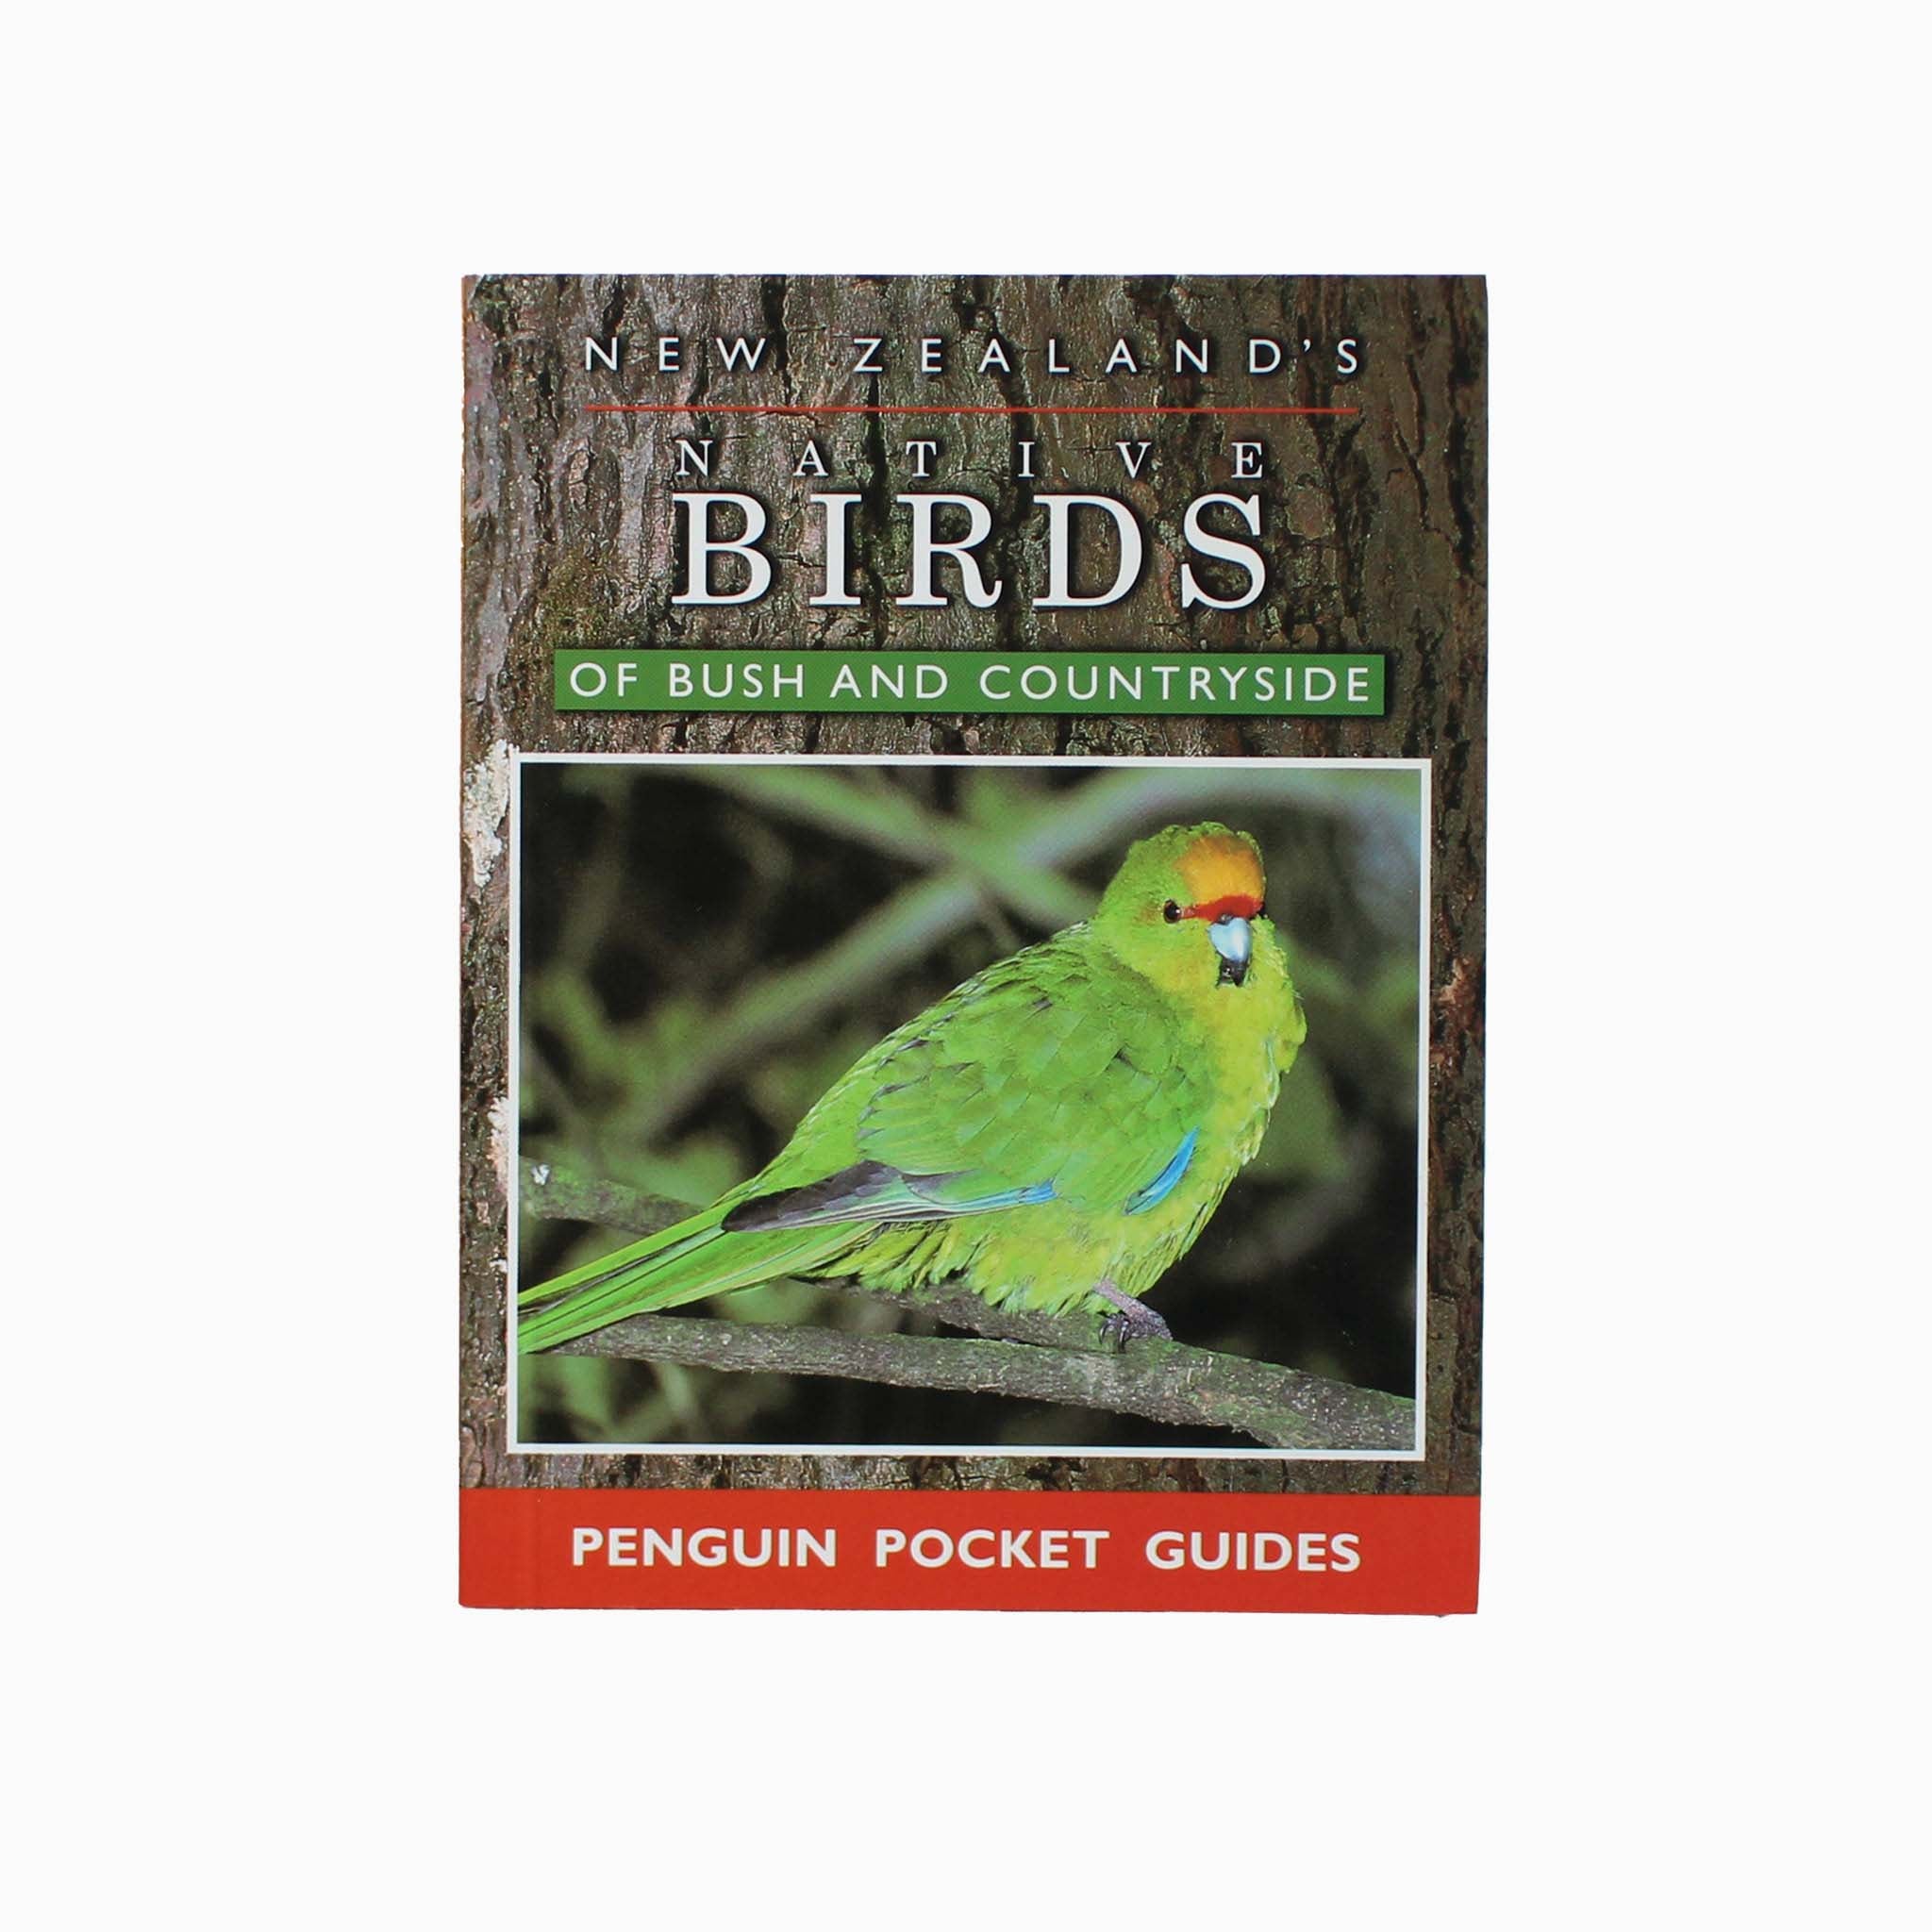 New Zealand's Native Birds of Bush and Countryside - Penguin Pocket Guide